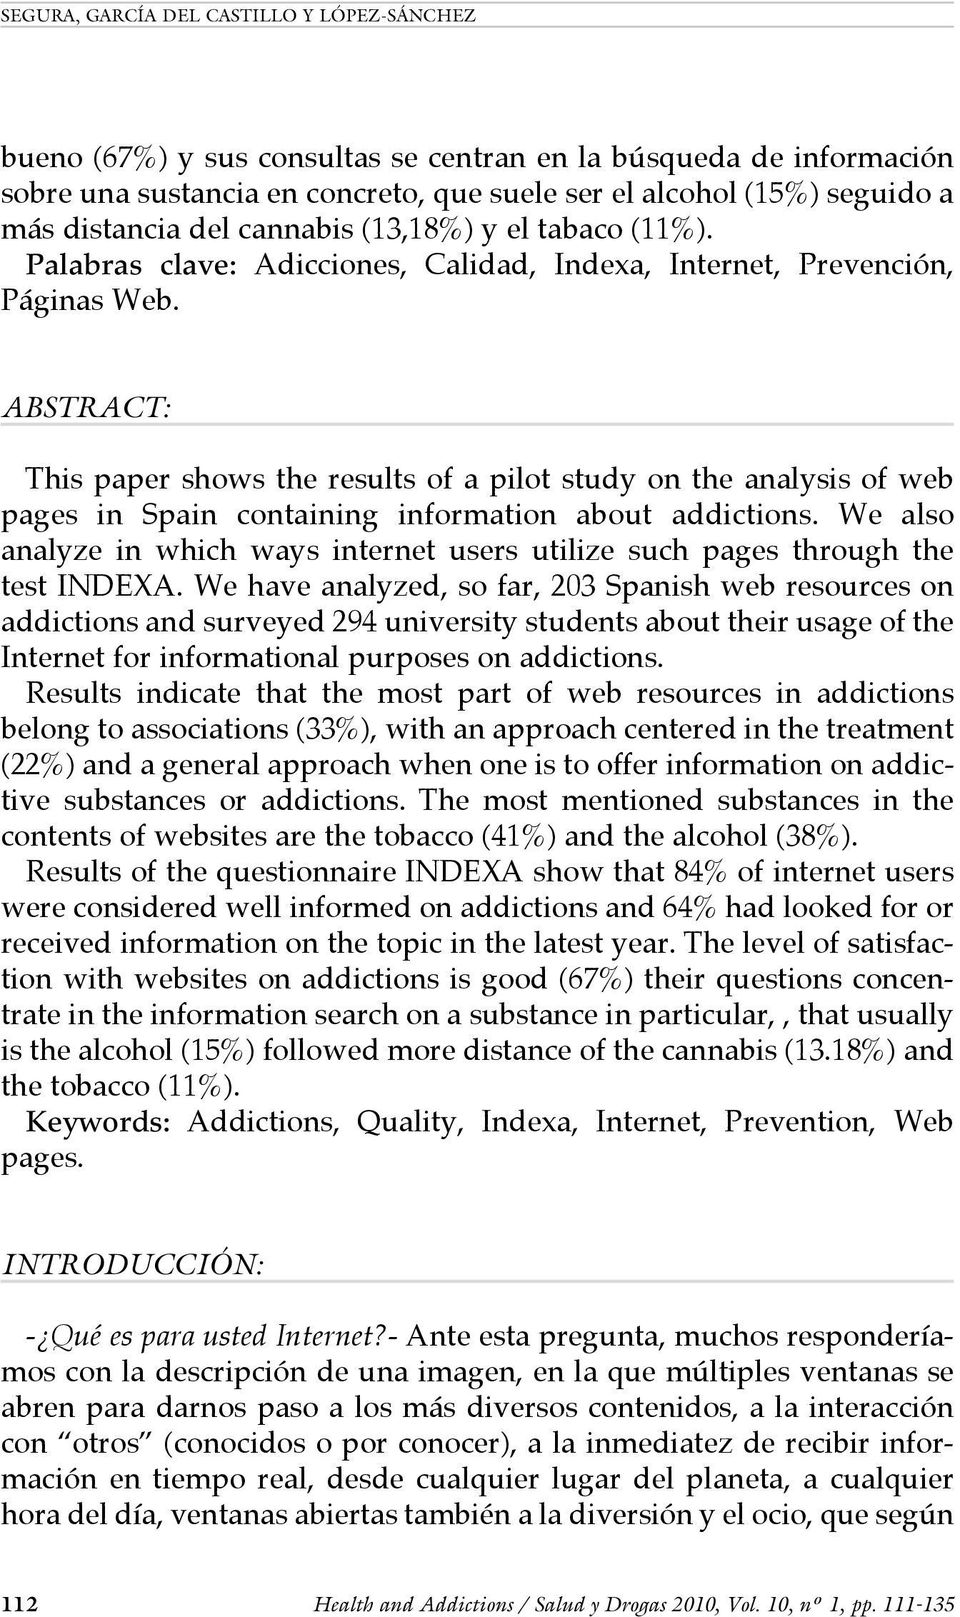 ABSTRACT: This paper shows the results of a pilot study on the analysis of web pages in Spain containing information about addictions.